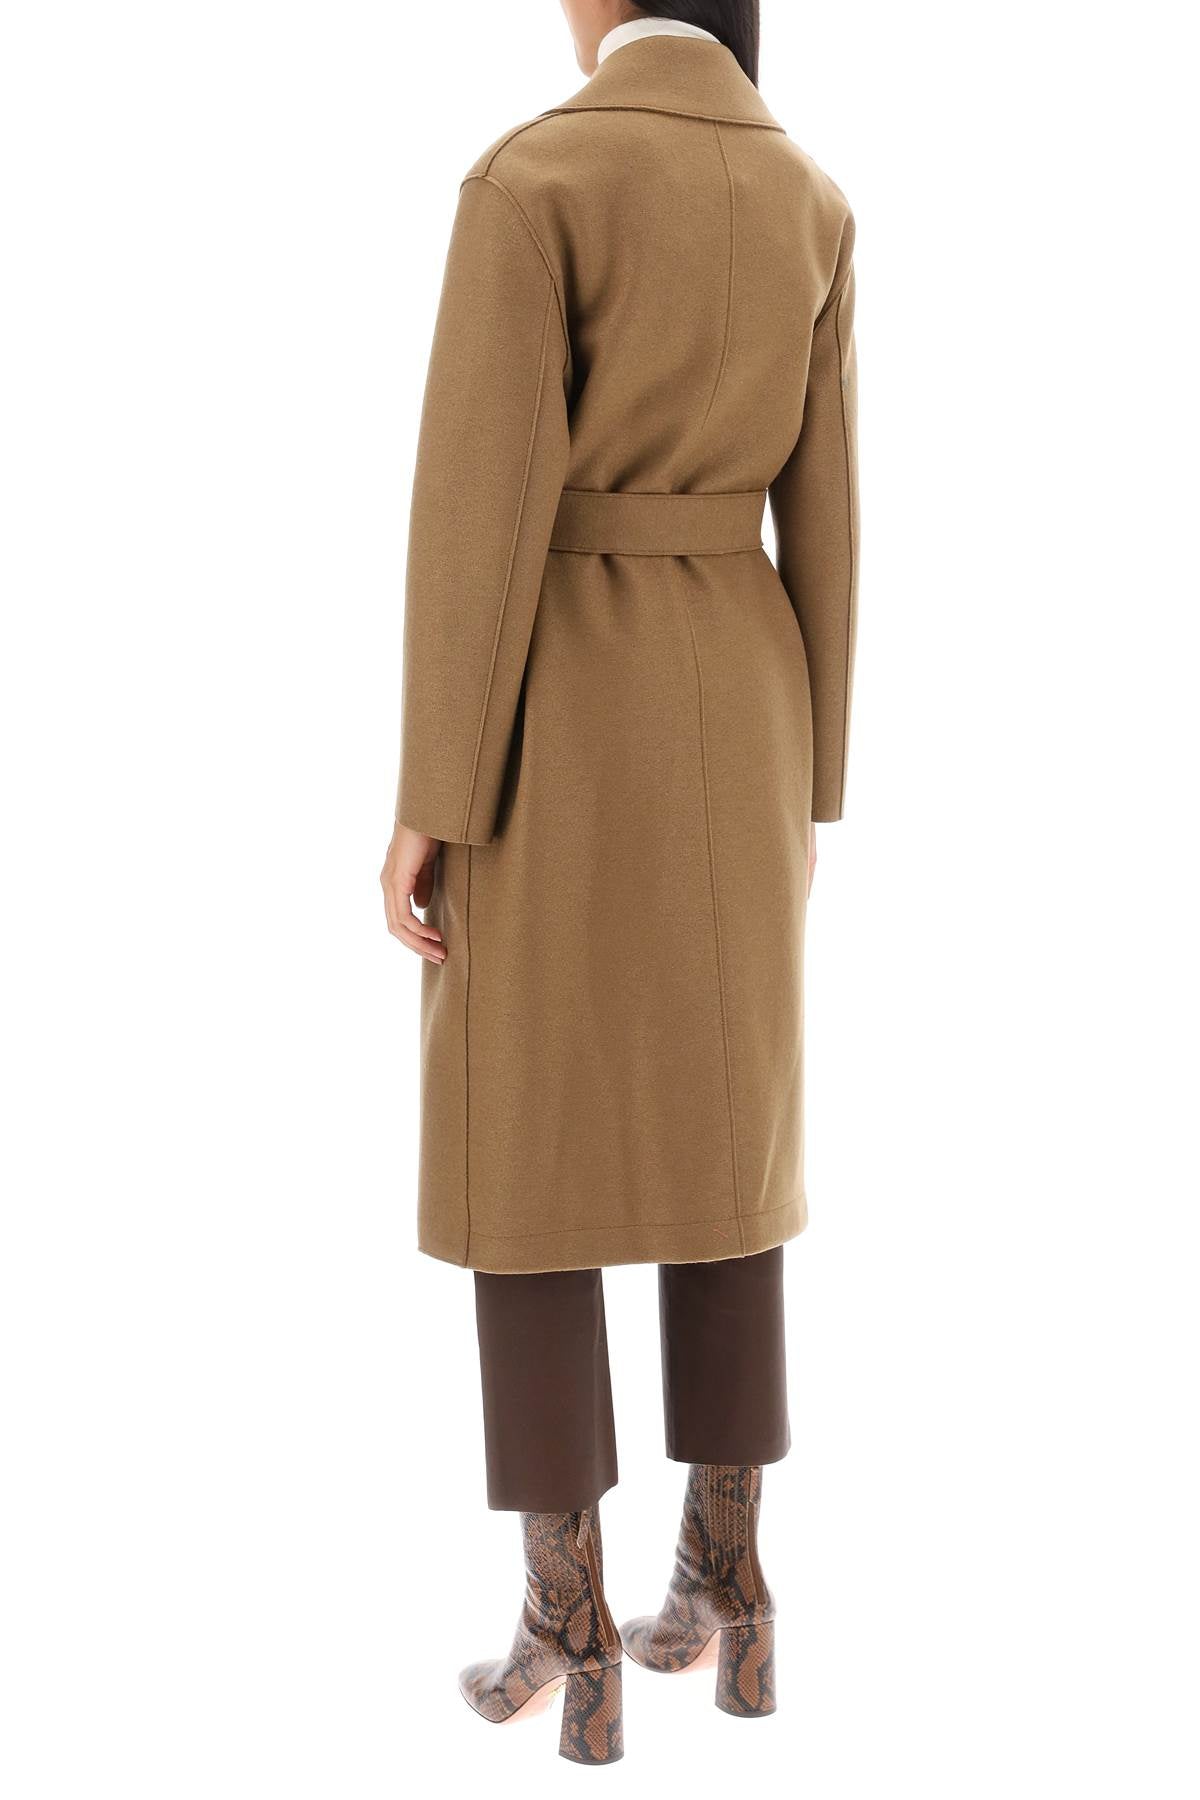 Harris wharf london long robe coat in pressed wool and polaire-2